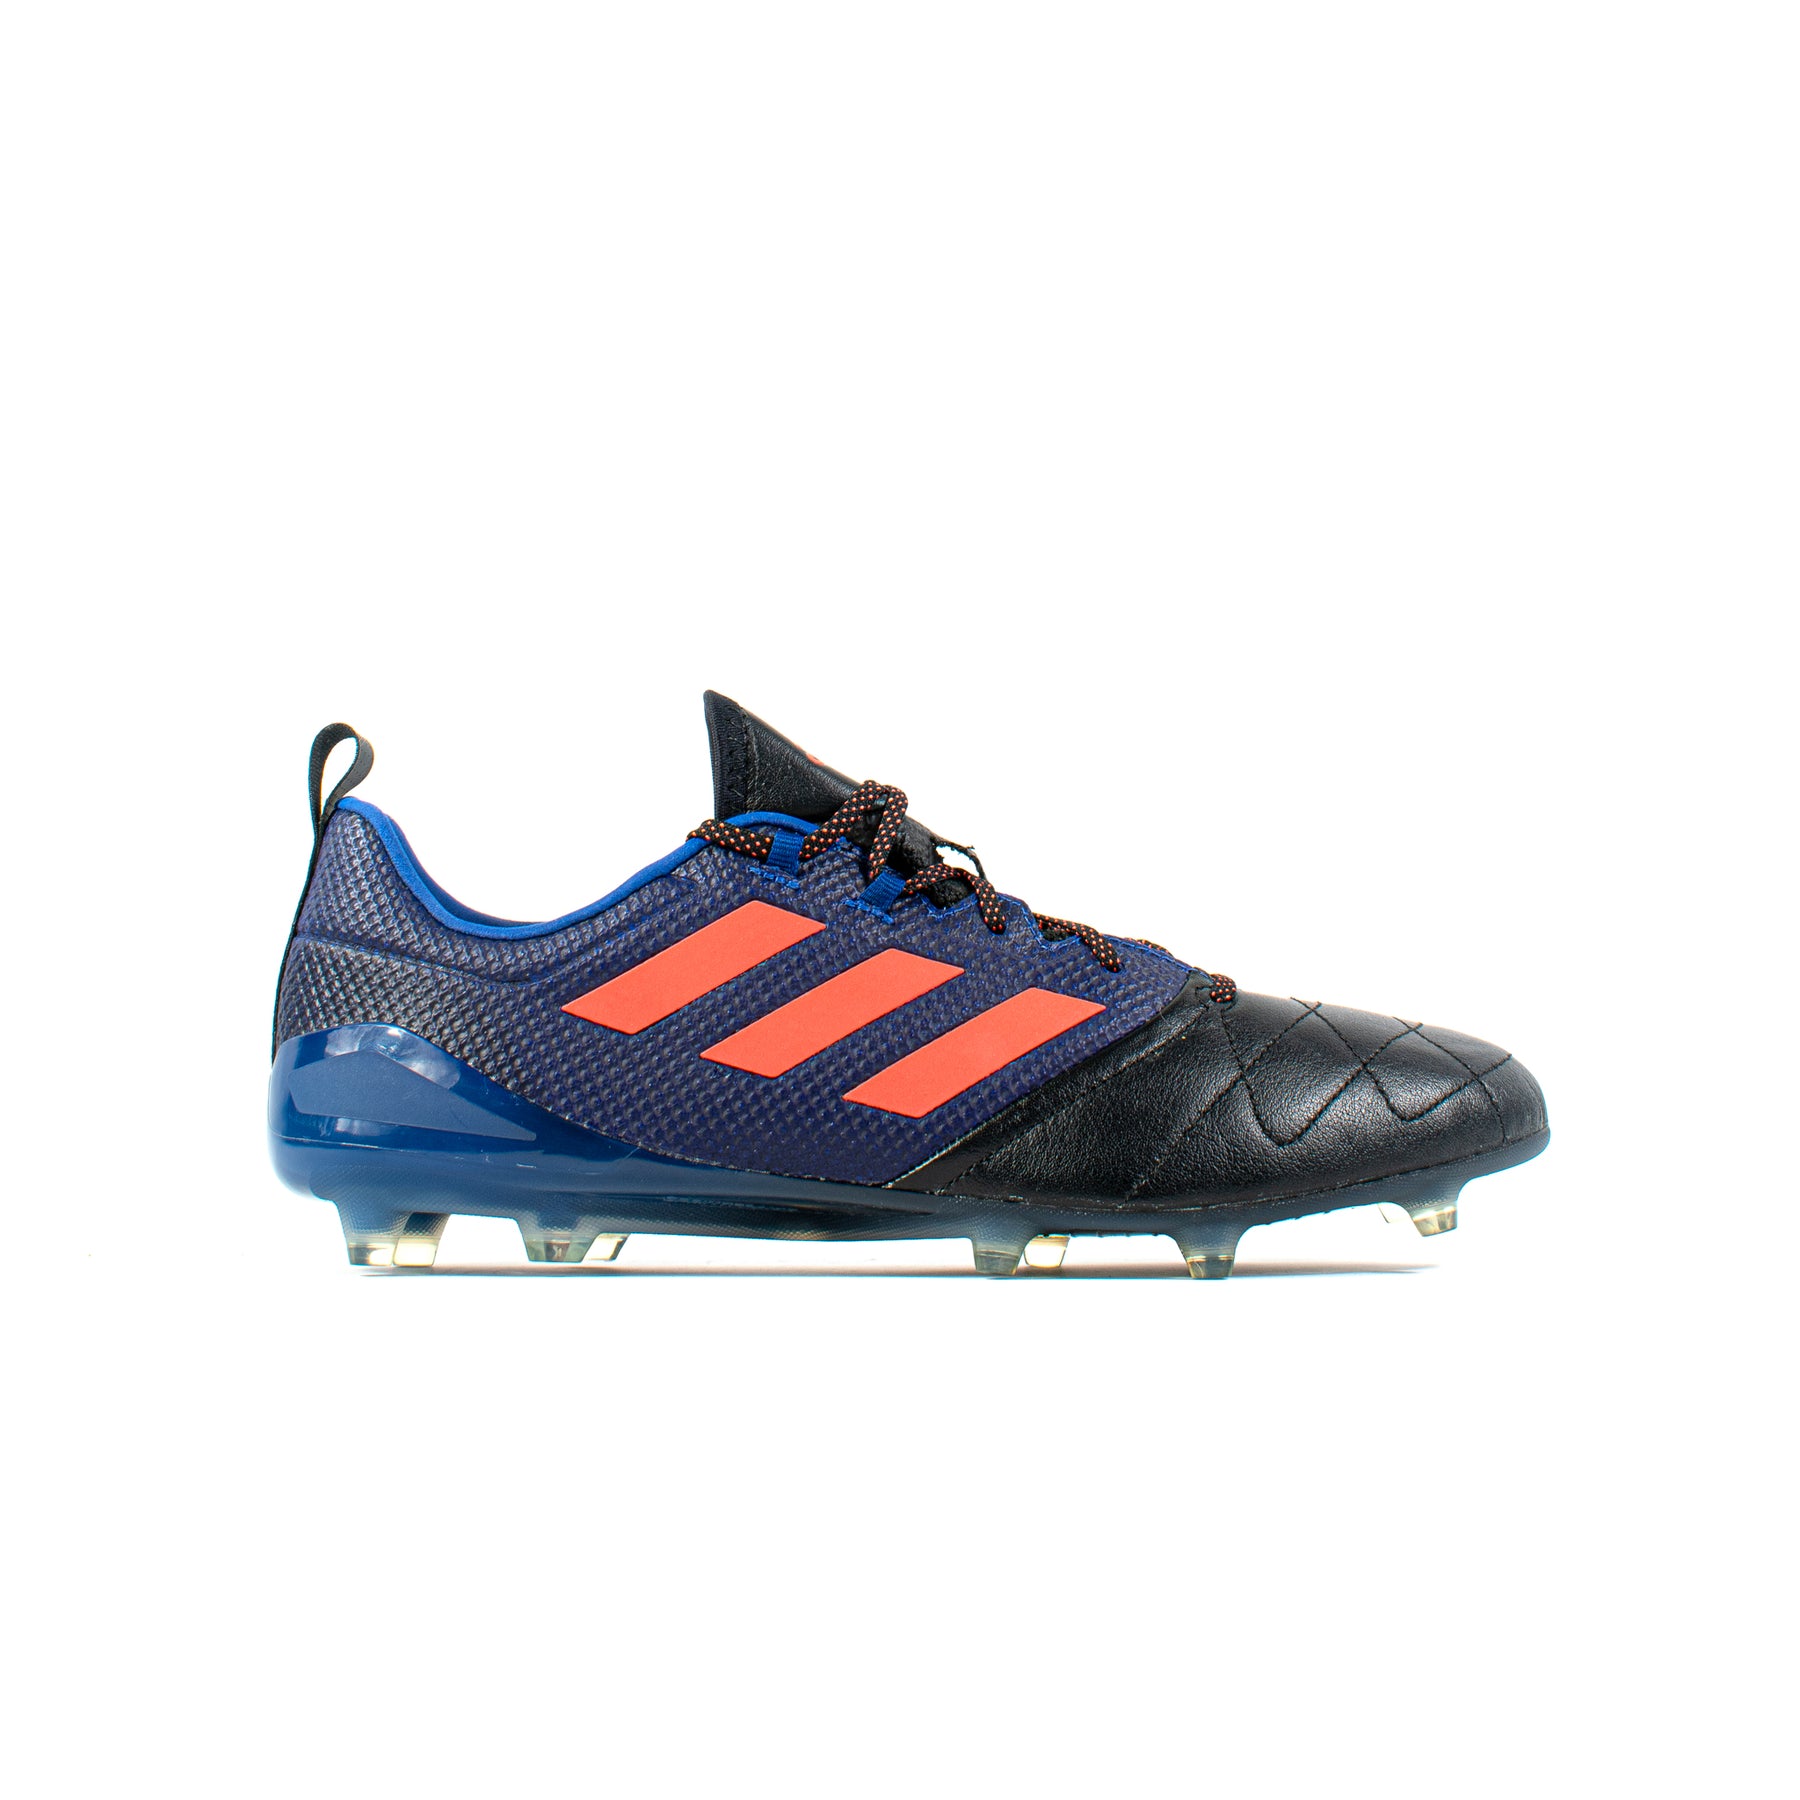 Adidas Ace 17.1 Leather Black Blue – Classic Soccer Cleats